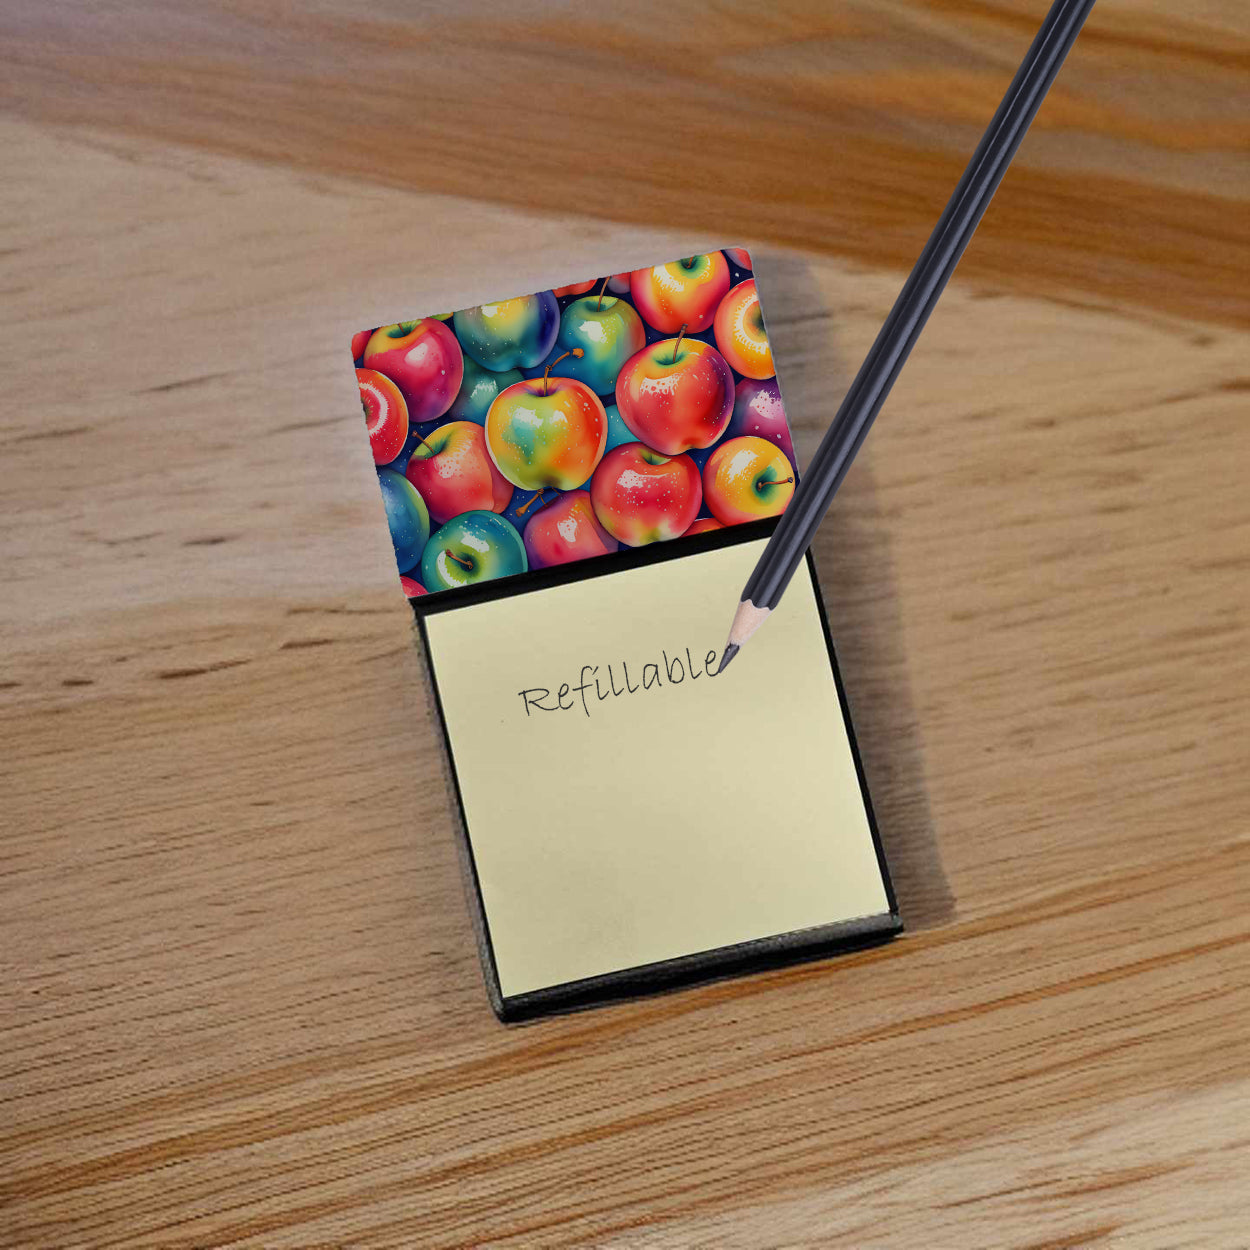 Buy this Colorful Apples Sticky Note Holder